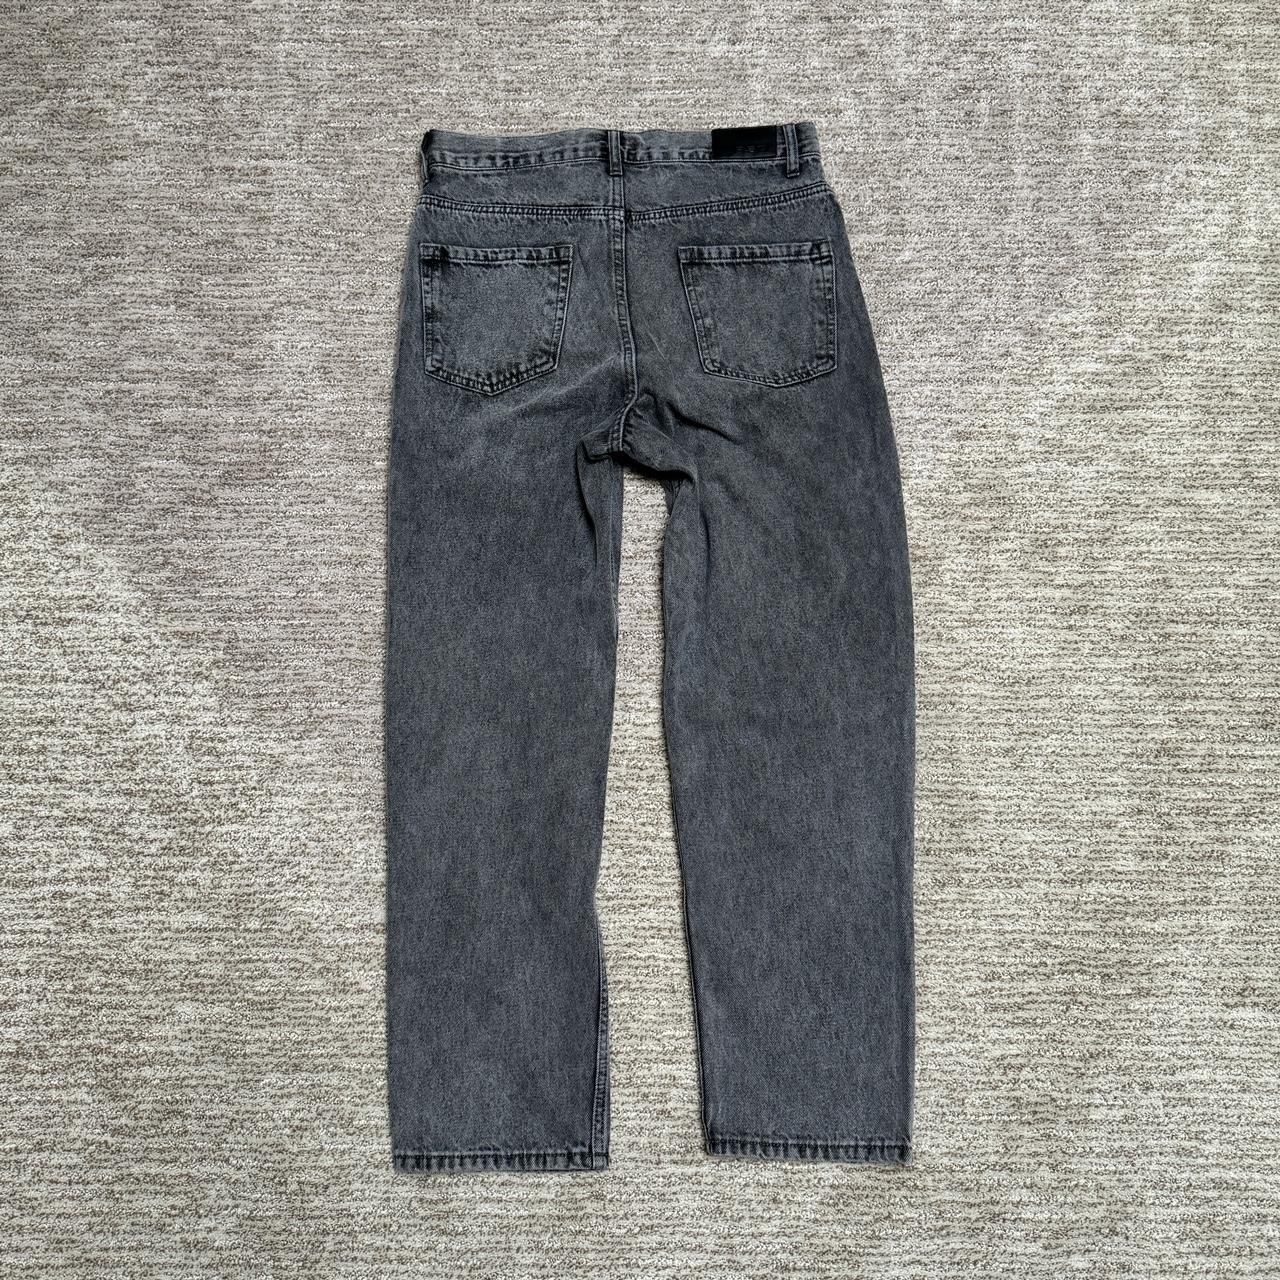 RSQ straight jeans Size 28x30 - Depop